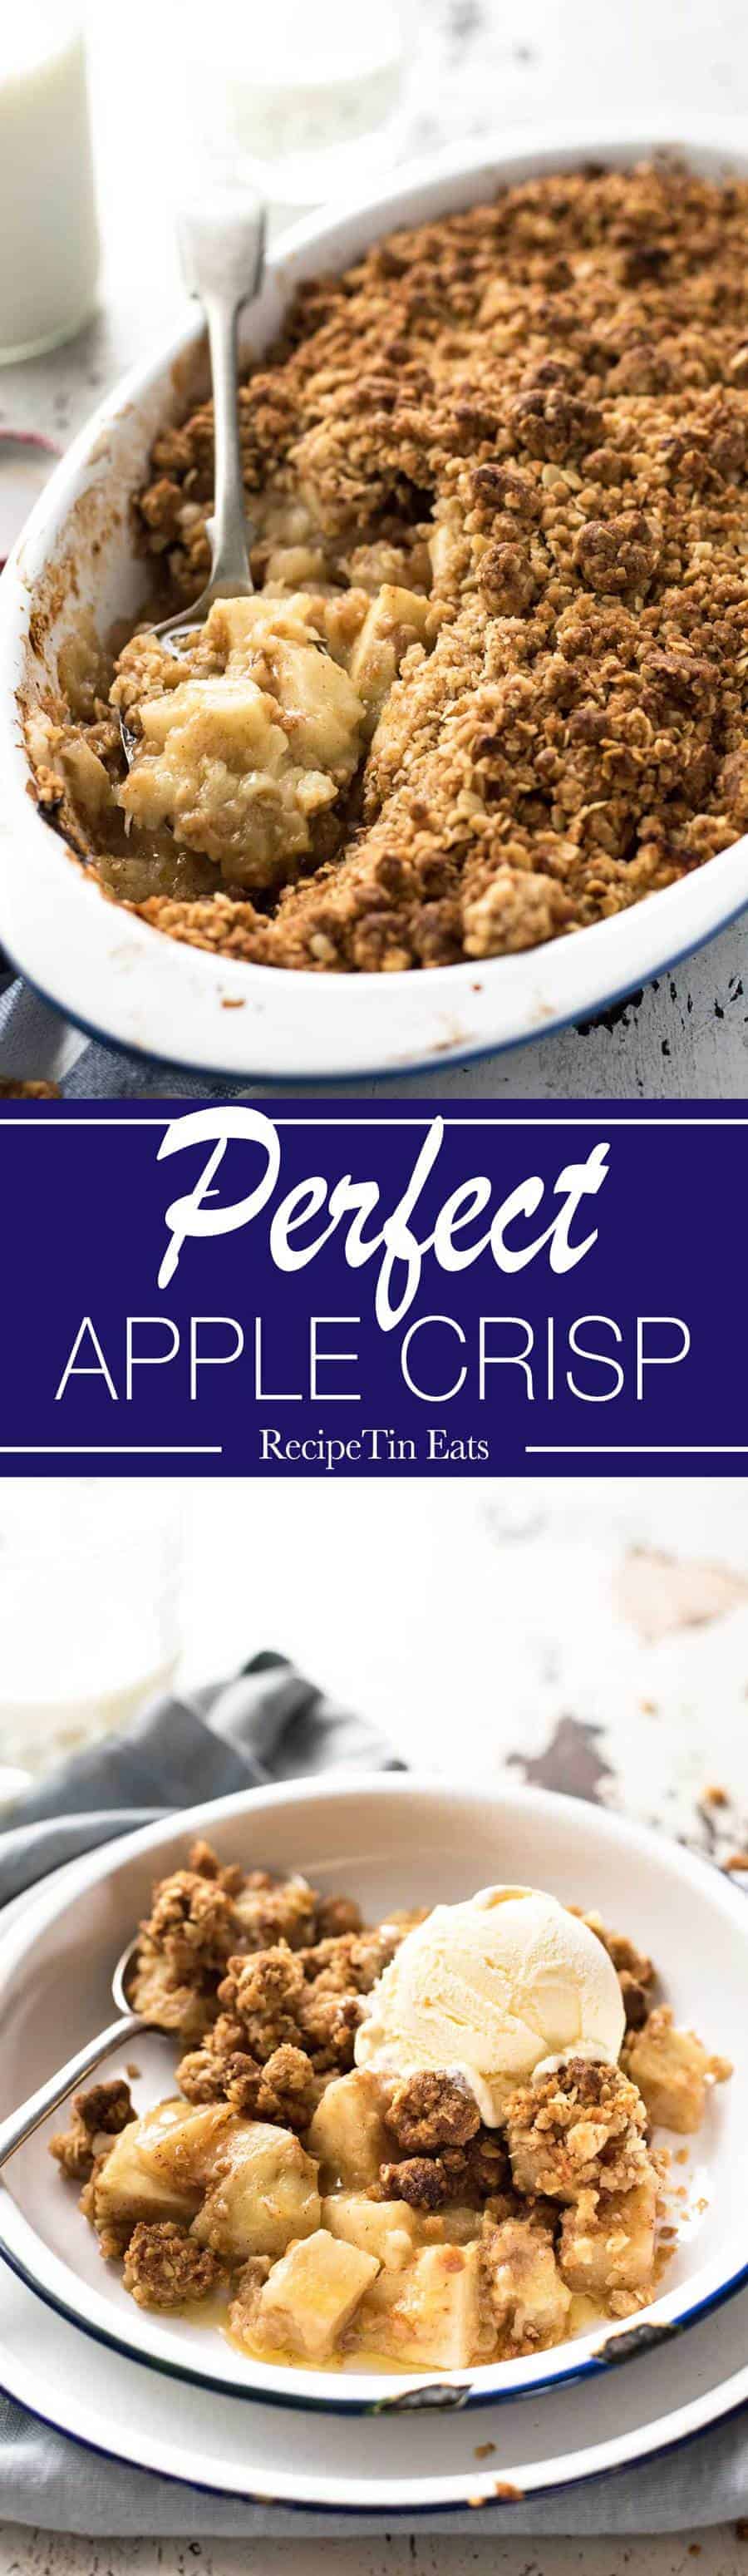 The BEST Apple Crumble (Apple Crisp) - Juicy apple filing with a gorgeous CRUNCHY crumbly topping. So easy to make! www.recipetineats.com